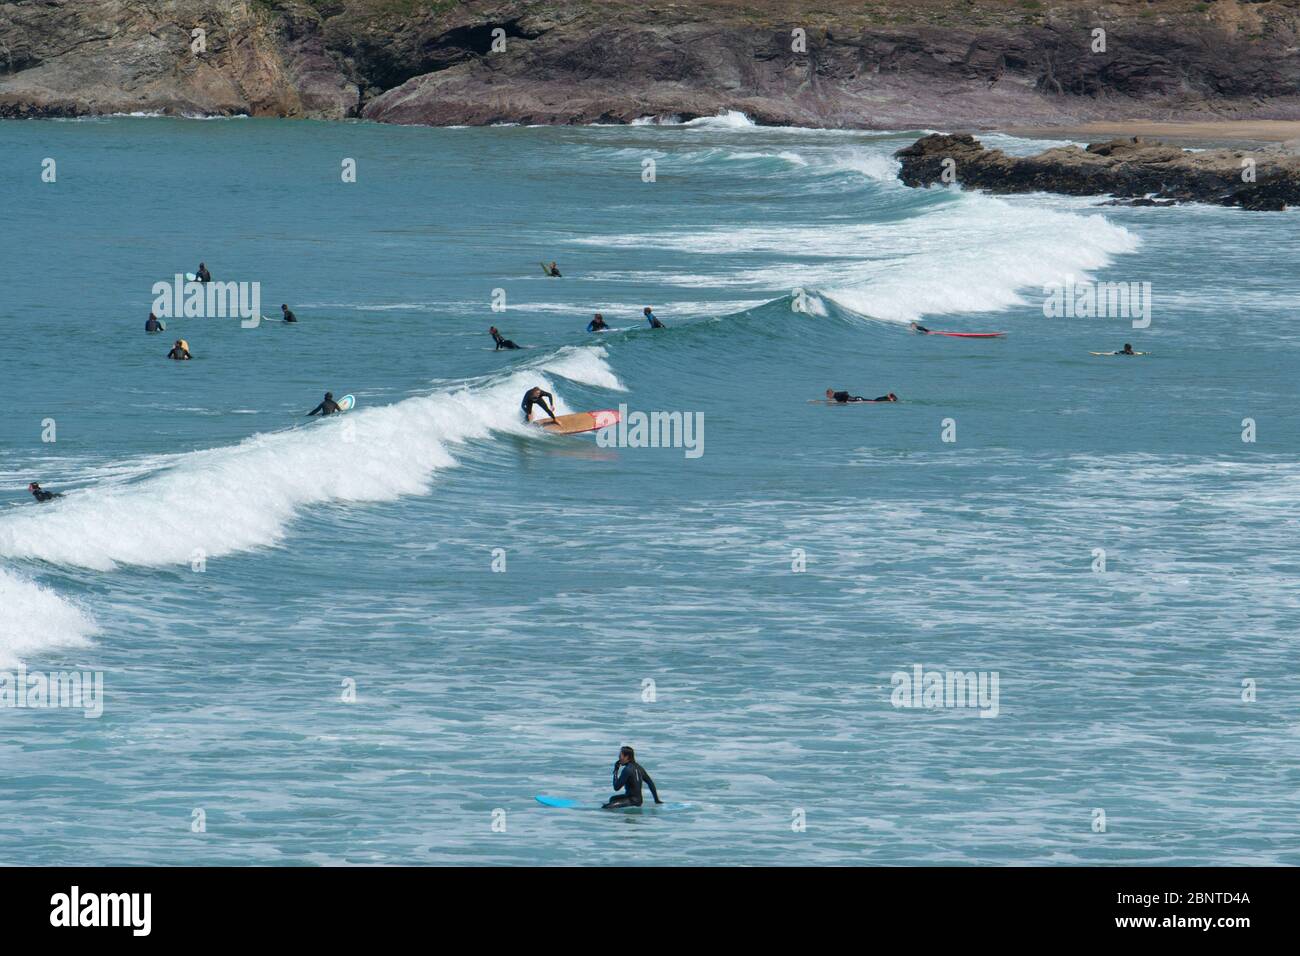 Polzeath, Cornwall, UK. 16th May 2020. UK Weather. The car park and sea at Polzeath was starting to get busy this morning with surfers out making the most of the fine weather. Credit CWPIX / Alamy Live News. Stock Photo